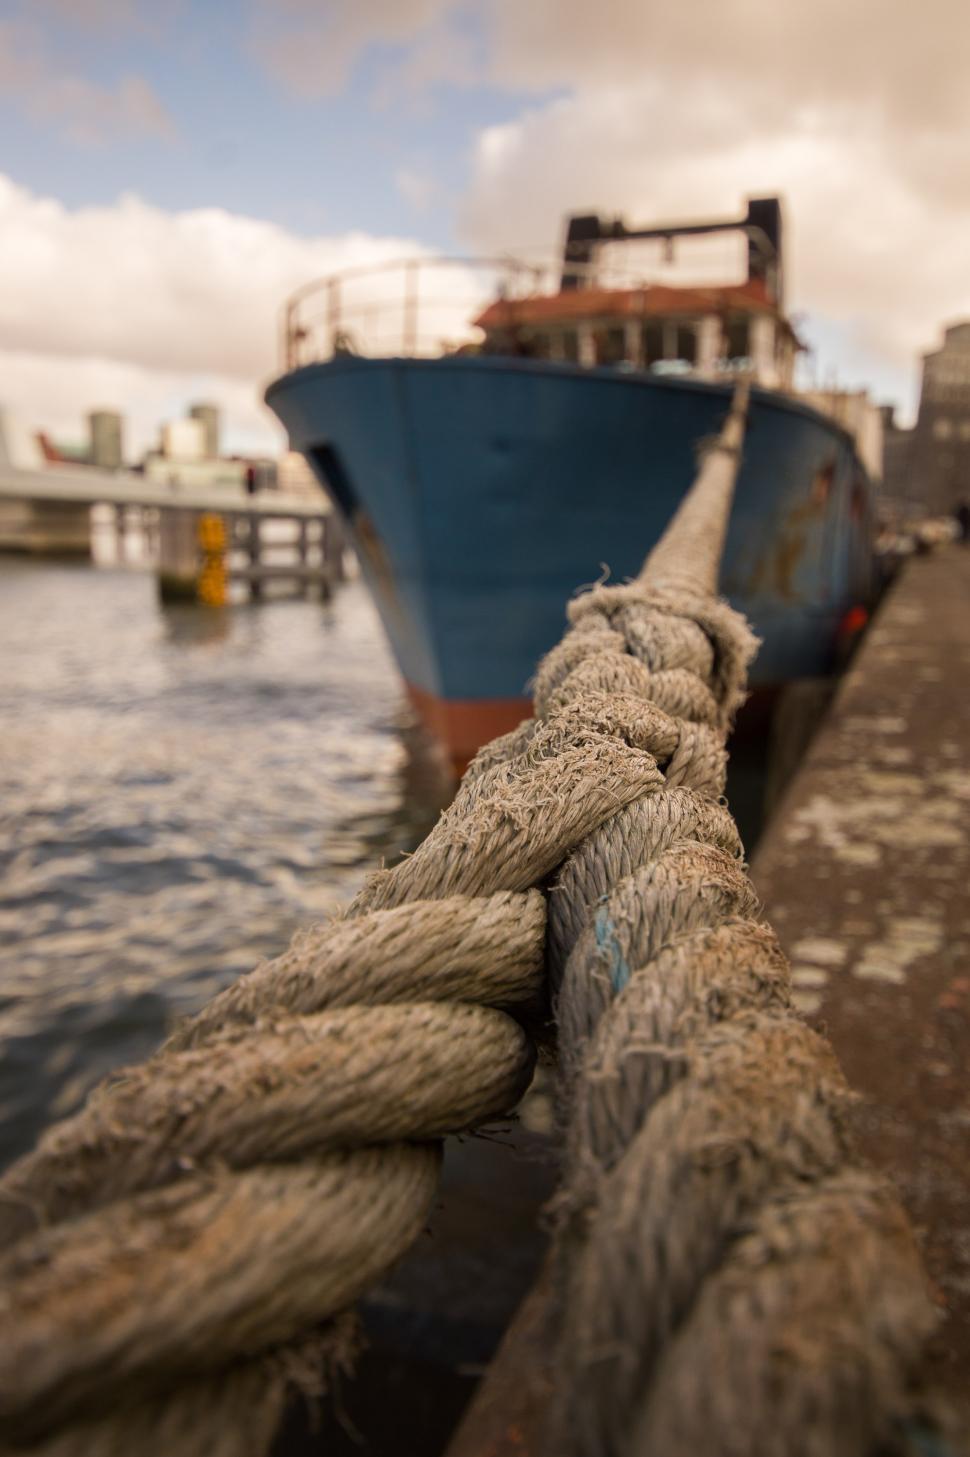 Free Image of Blue and White Boat Docked at Dock 